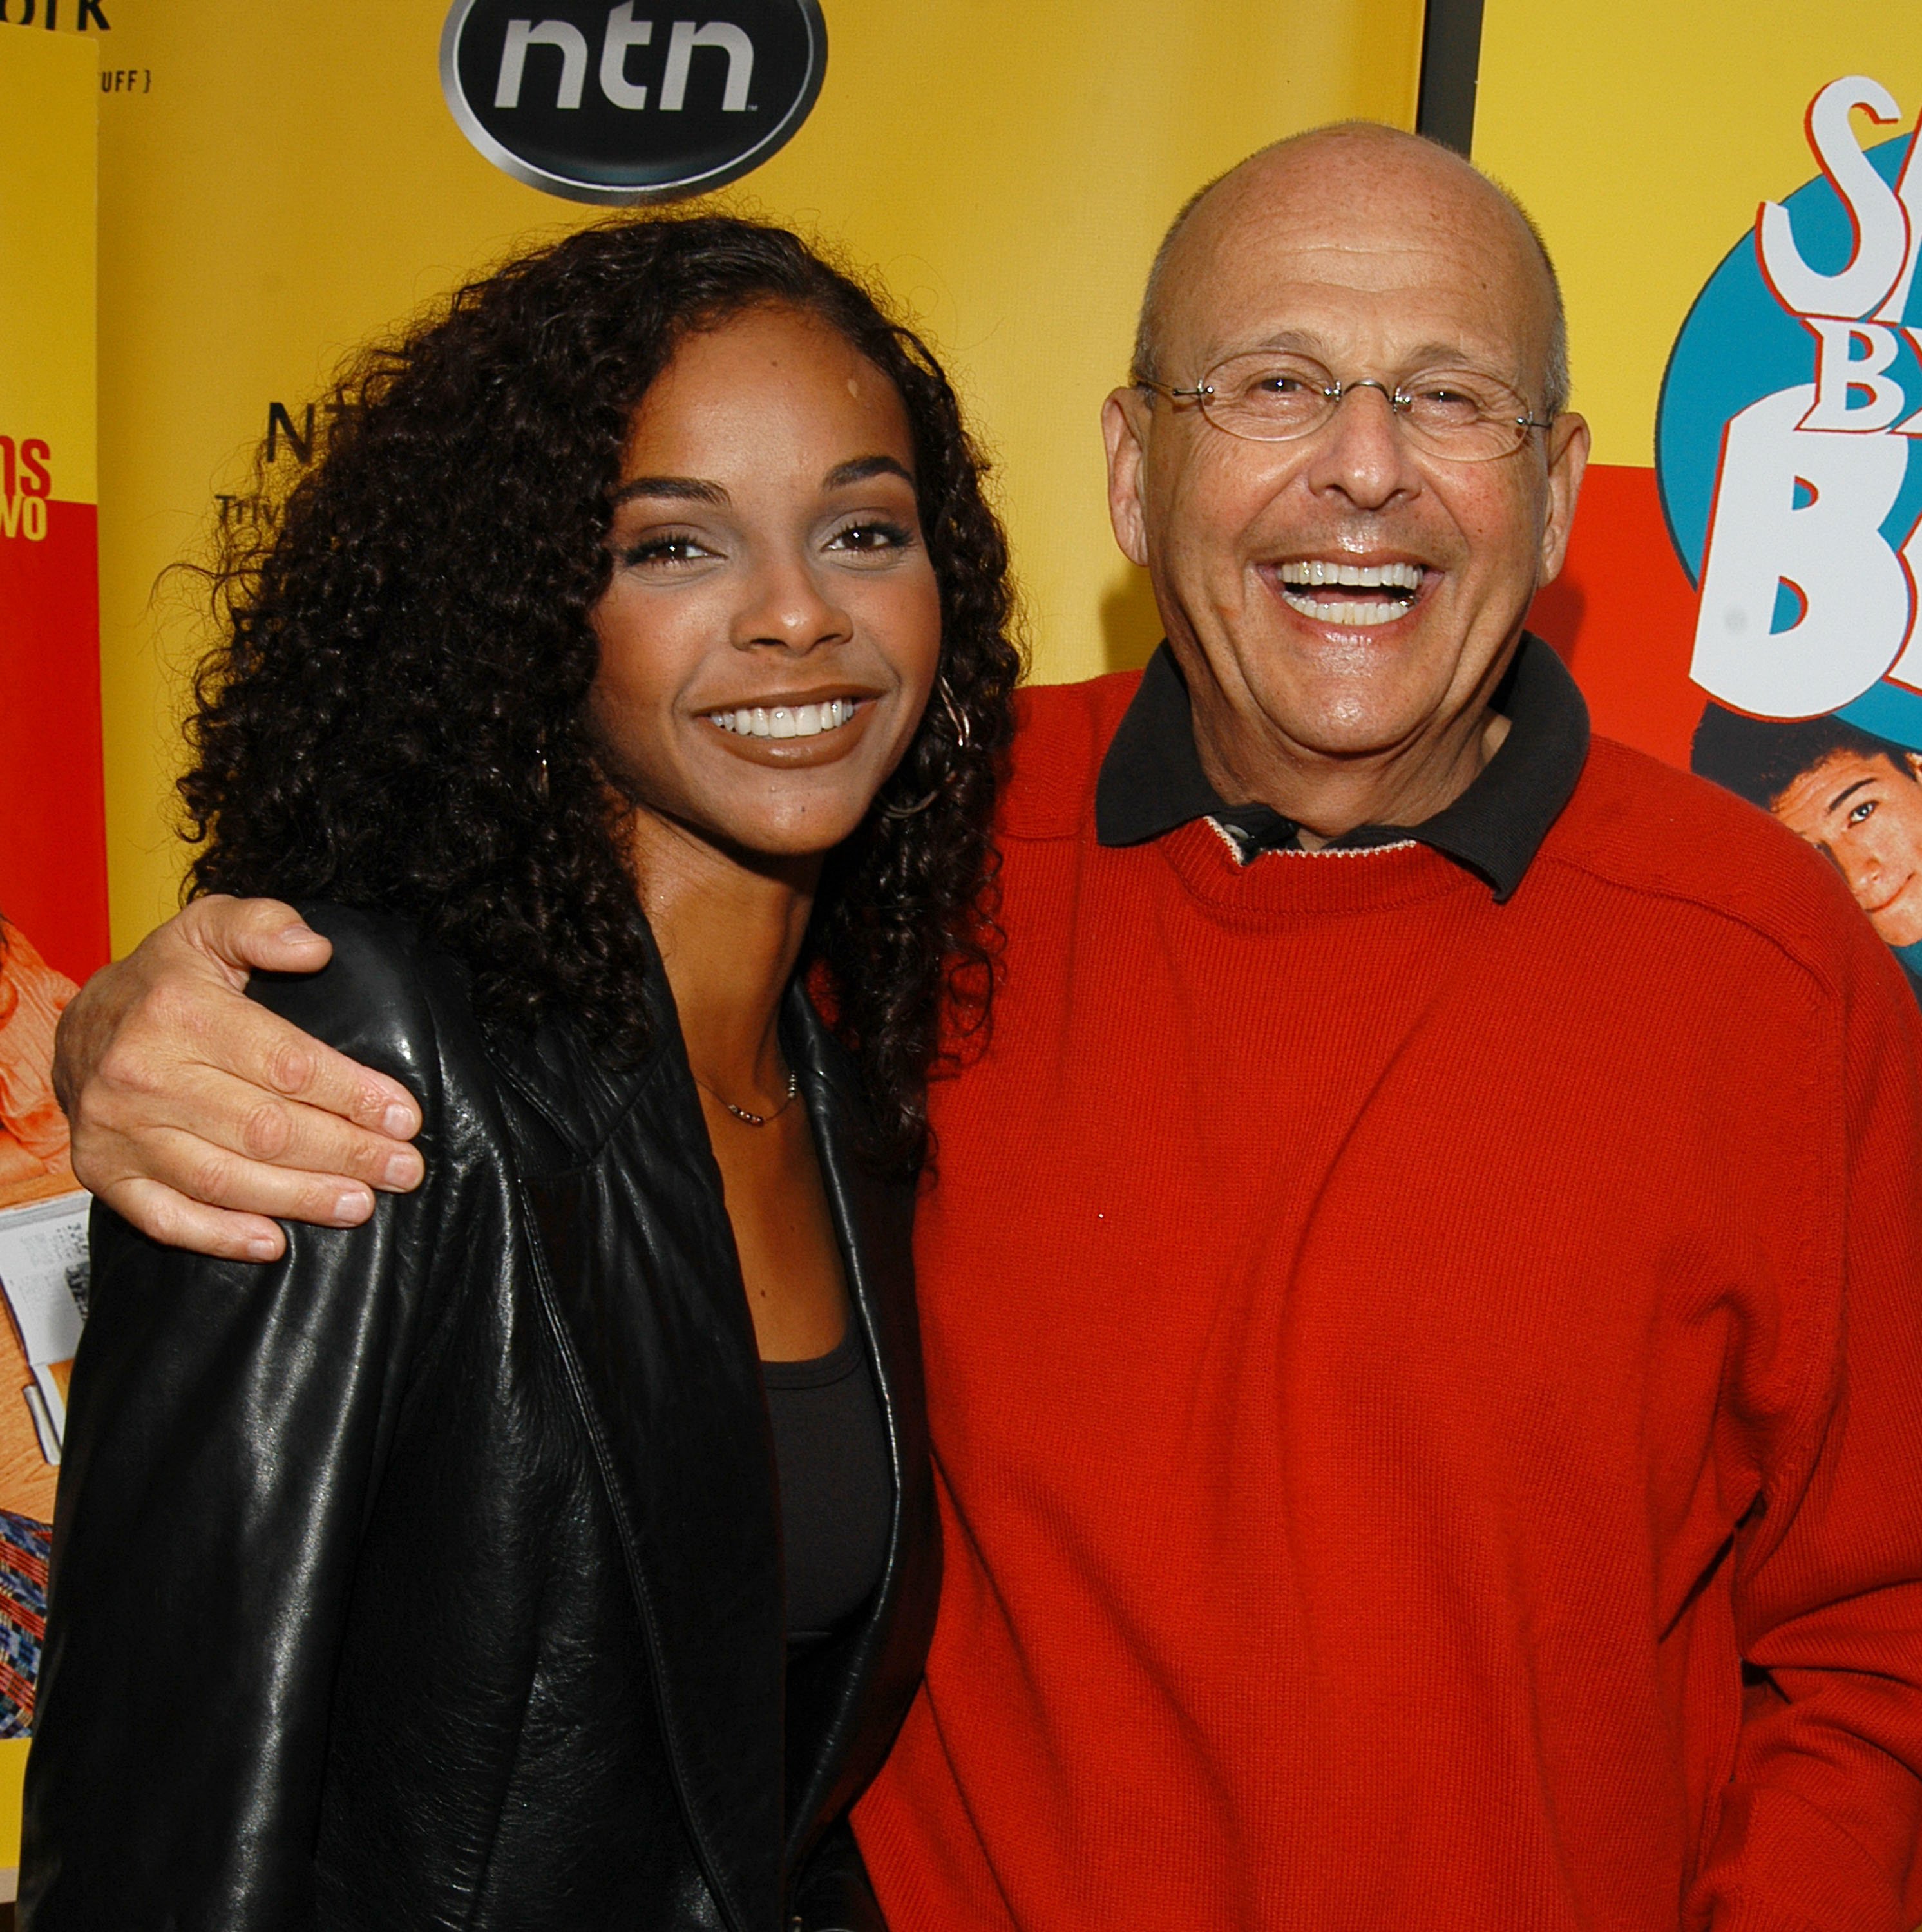 Lark Voorhies (Lisa Turtle) and televison producer, Peter Engel pose for a photo at the 'Saved by the Bell' Season 1 and Season 2 DVD release event